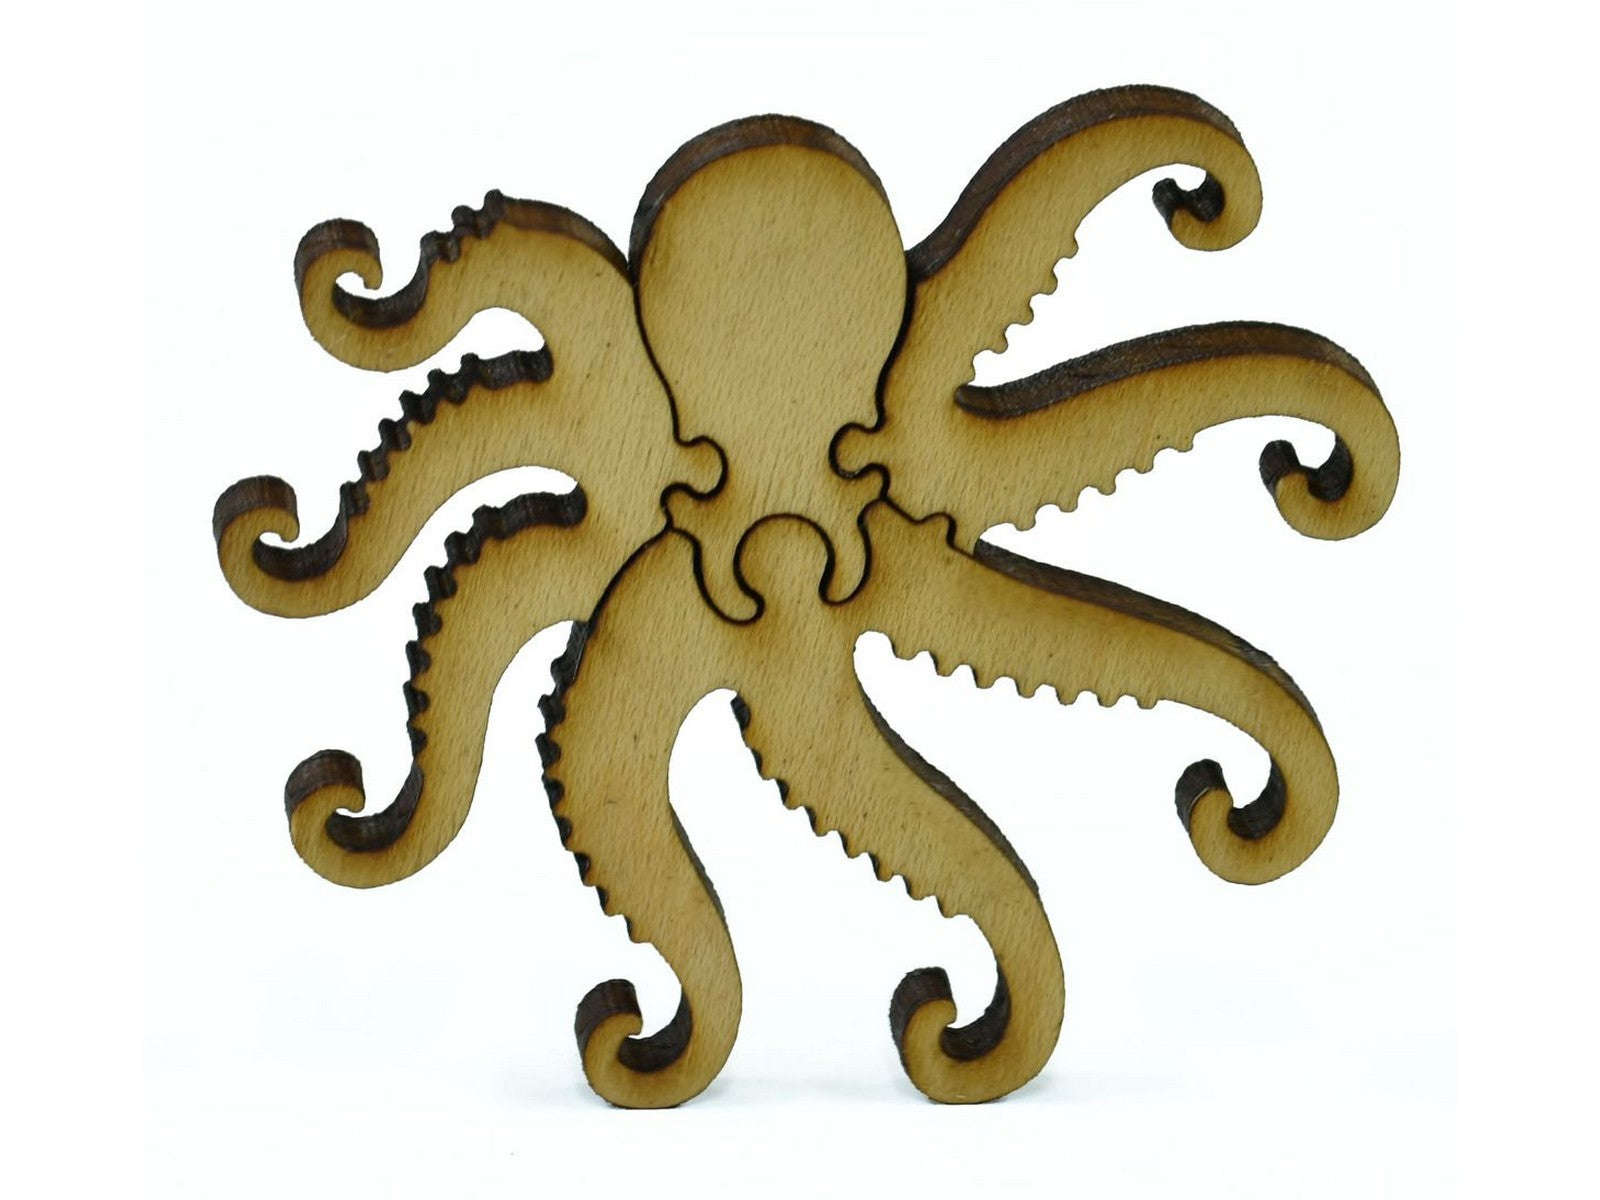 A closeup of pieces in the shape of an octopus.